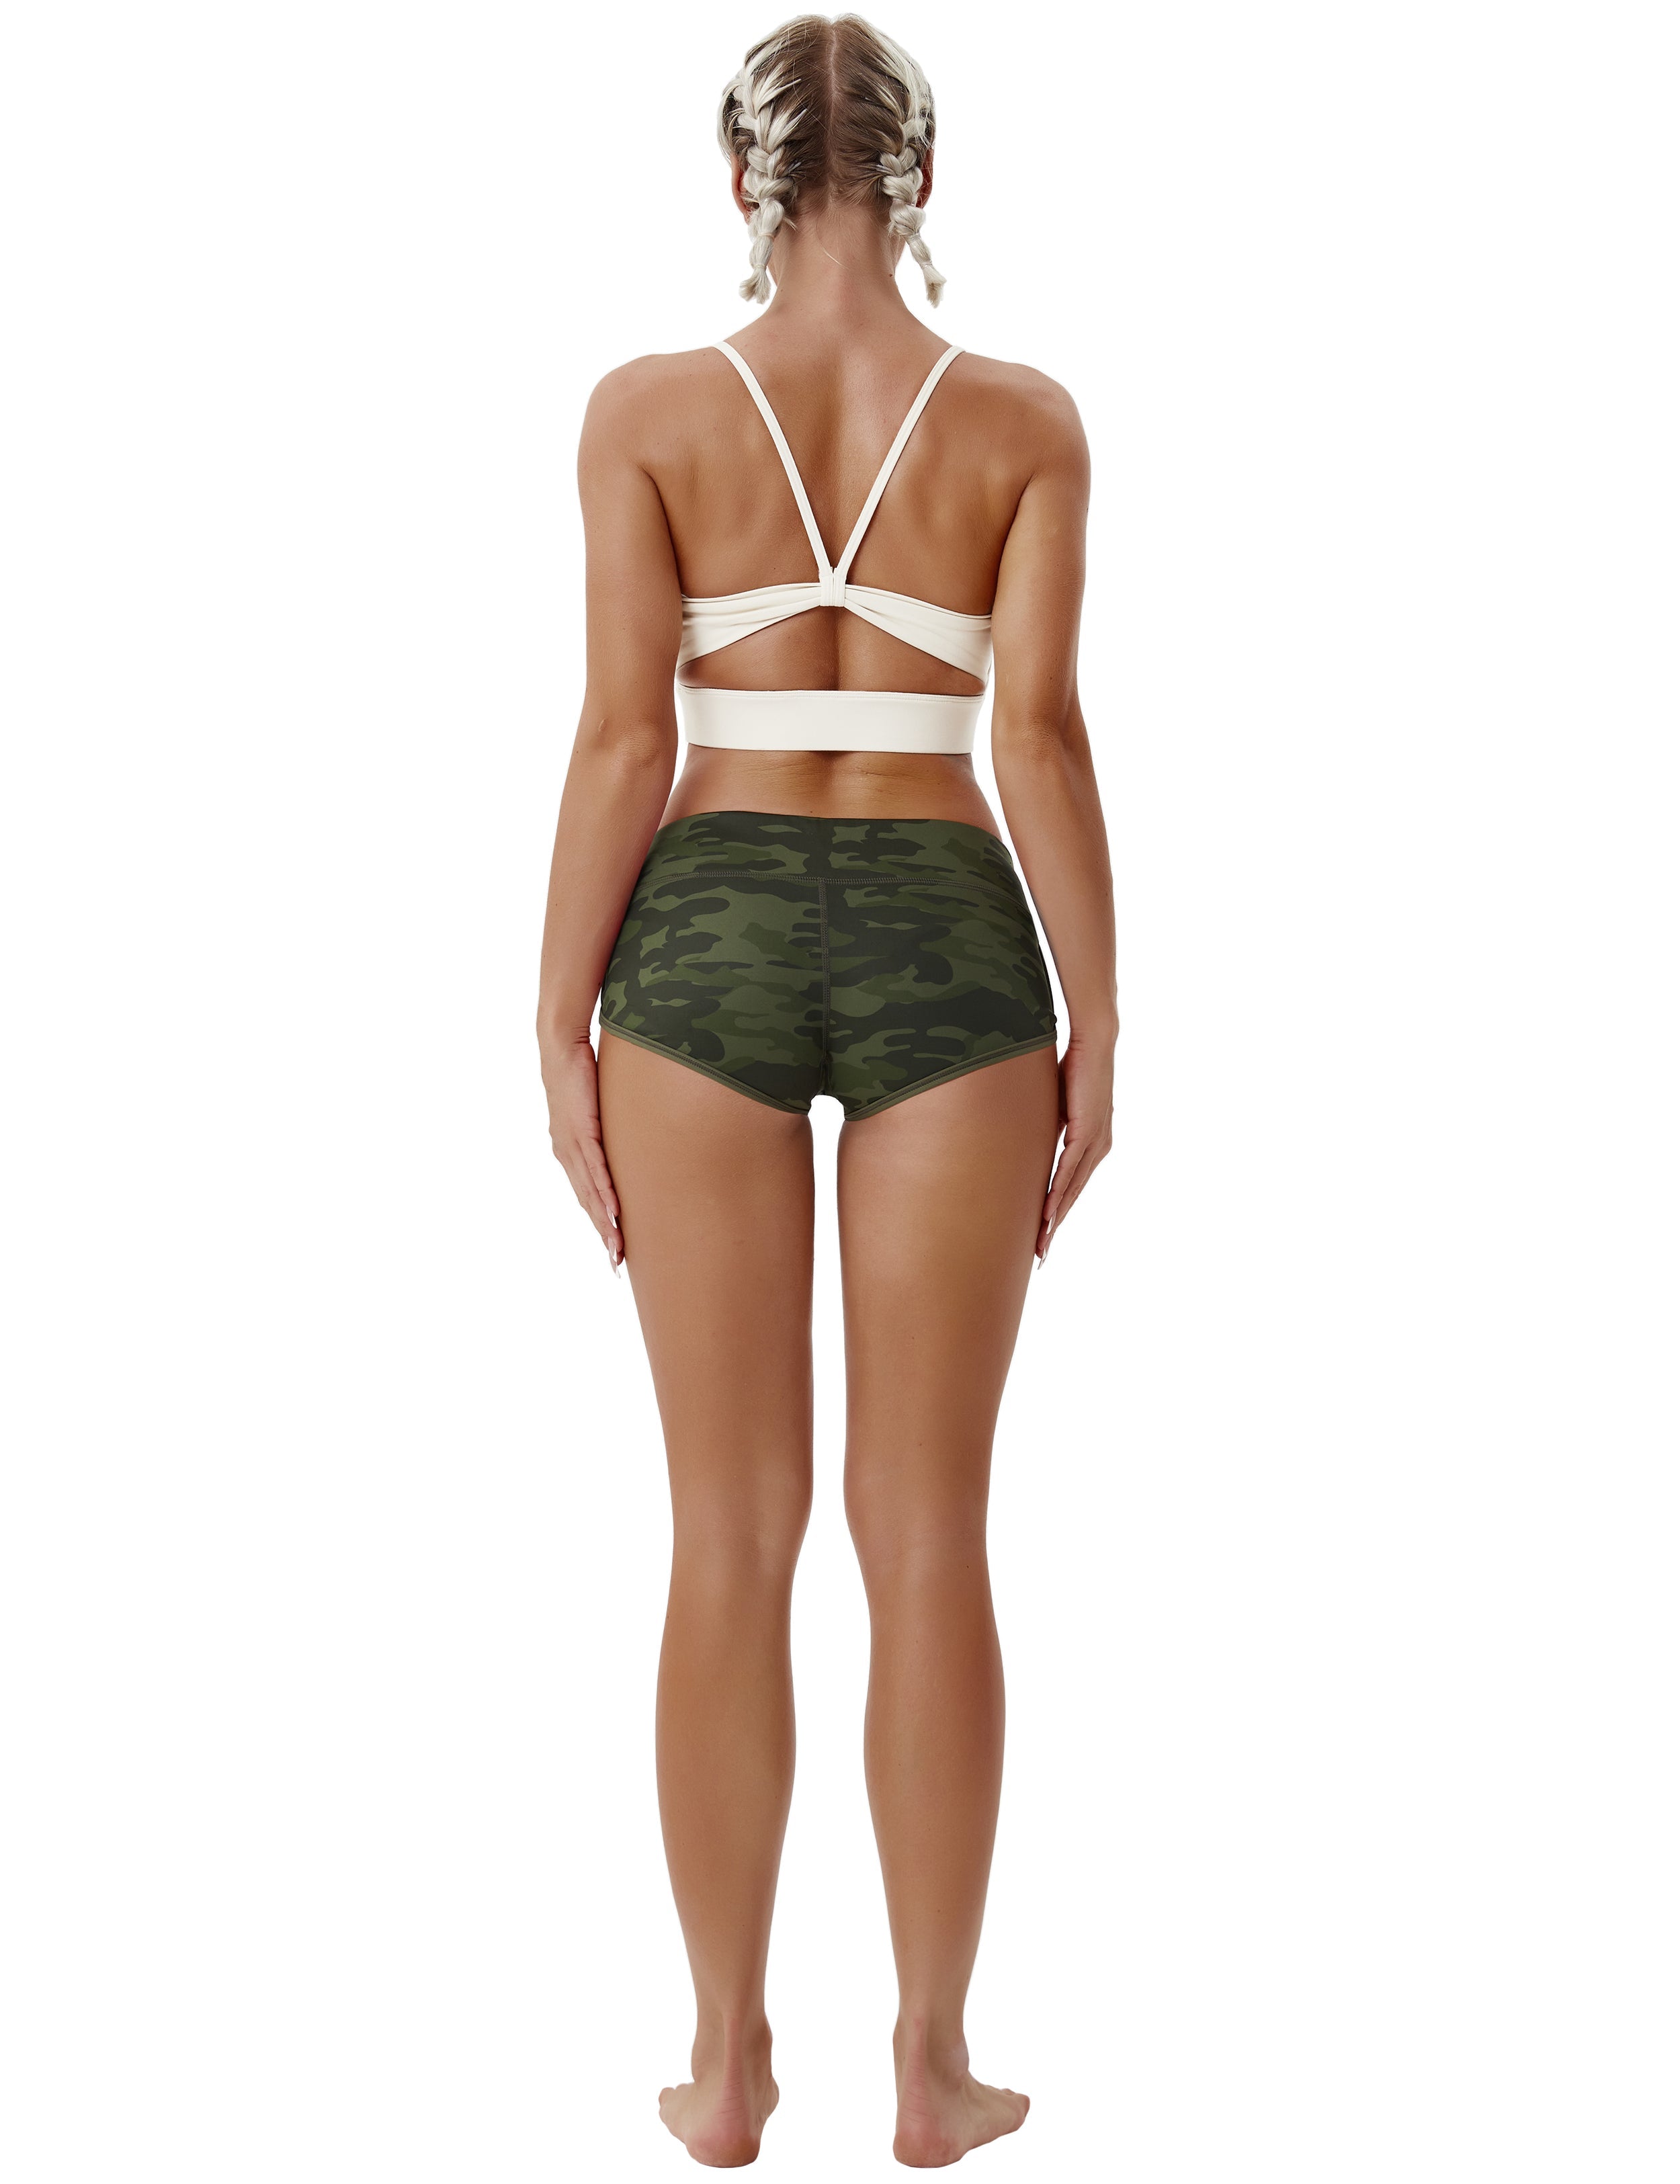 Printed Booty Golf Shorts green camo Sleek, soft, smooth and totally comfortable: our newest sexy style is here. Softest-ever fabric High elasticity High density 4-way stretch Fabric doesn't attract lint easily No see-through Moisture-wicking Machine wash 78% Polyester, 22% Spandex